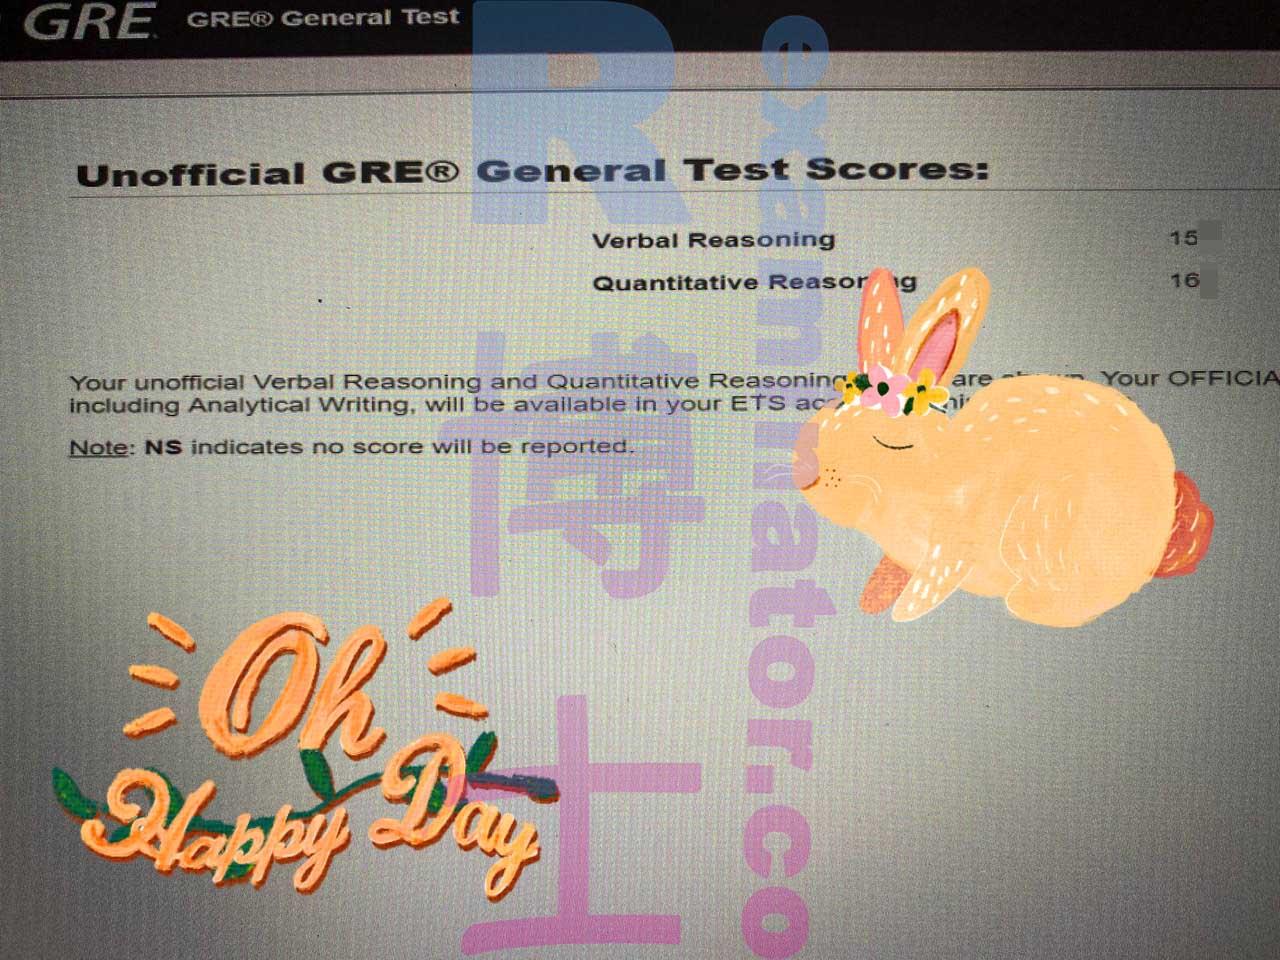 score image for GRE Cheating success story #416